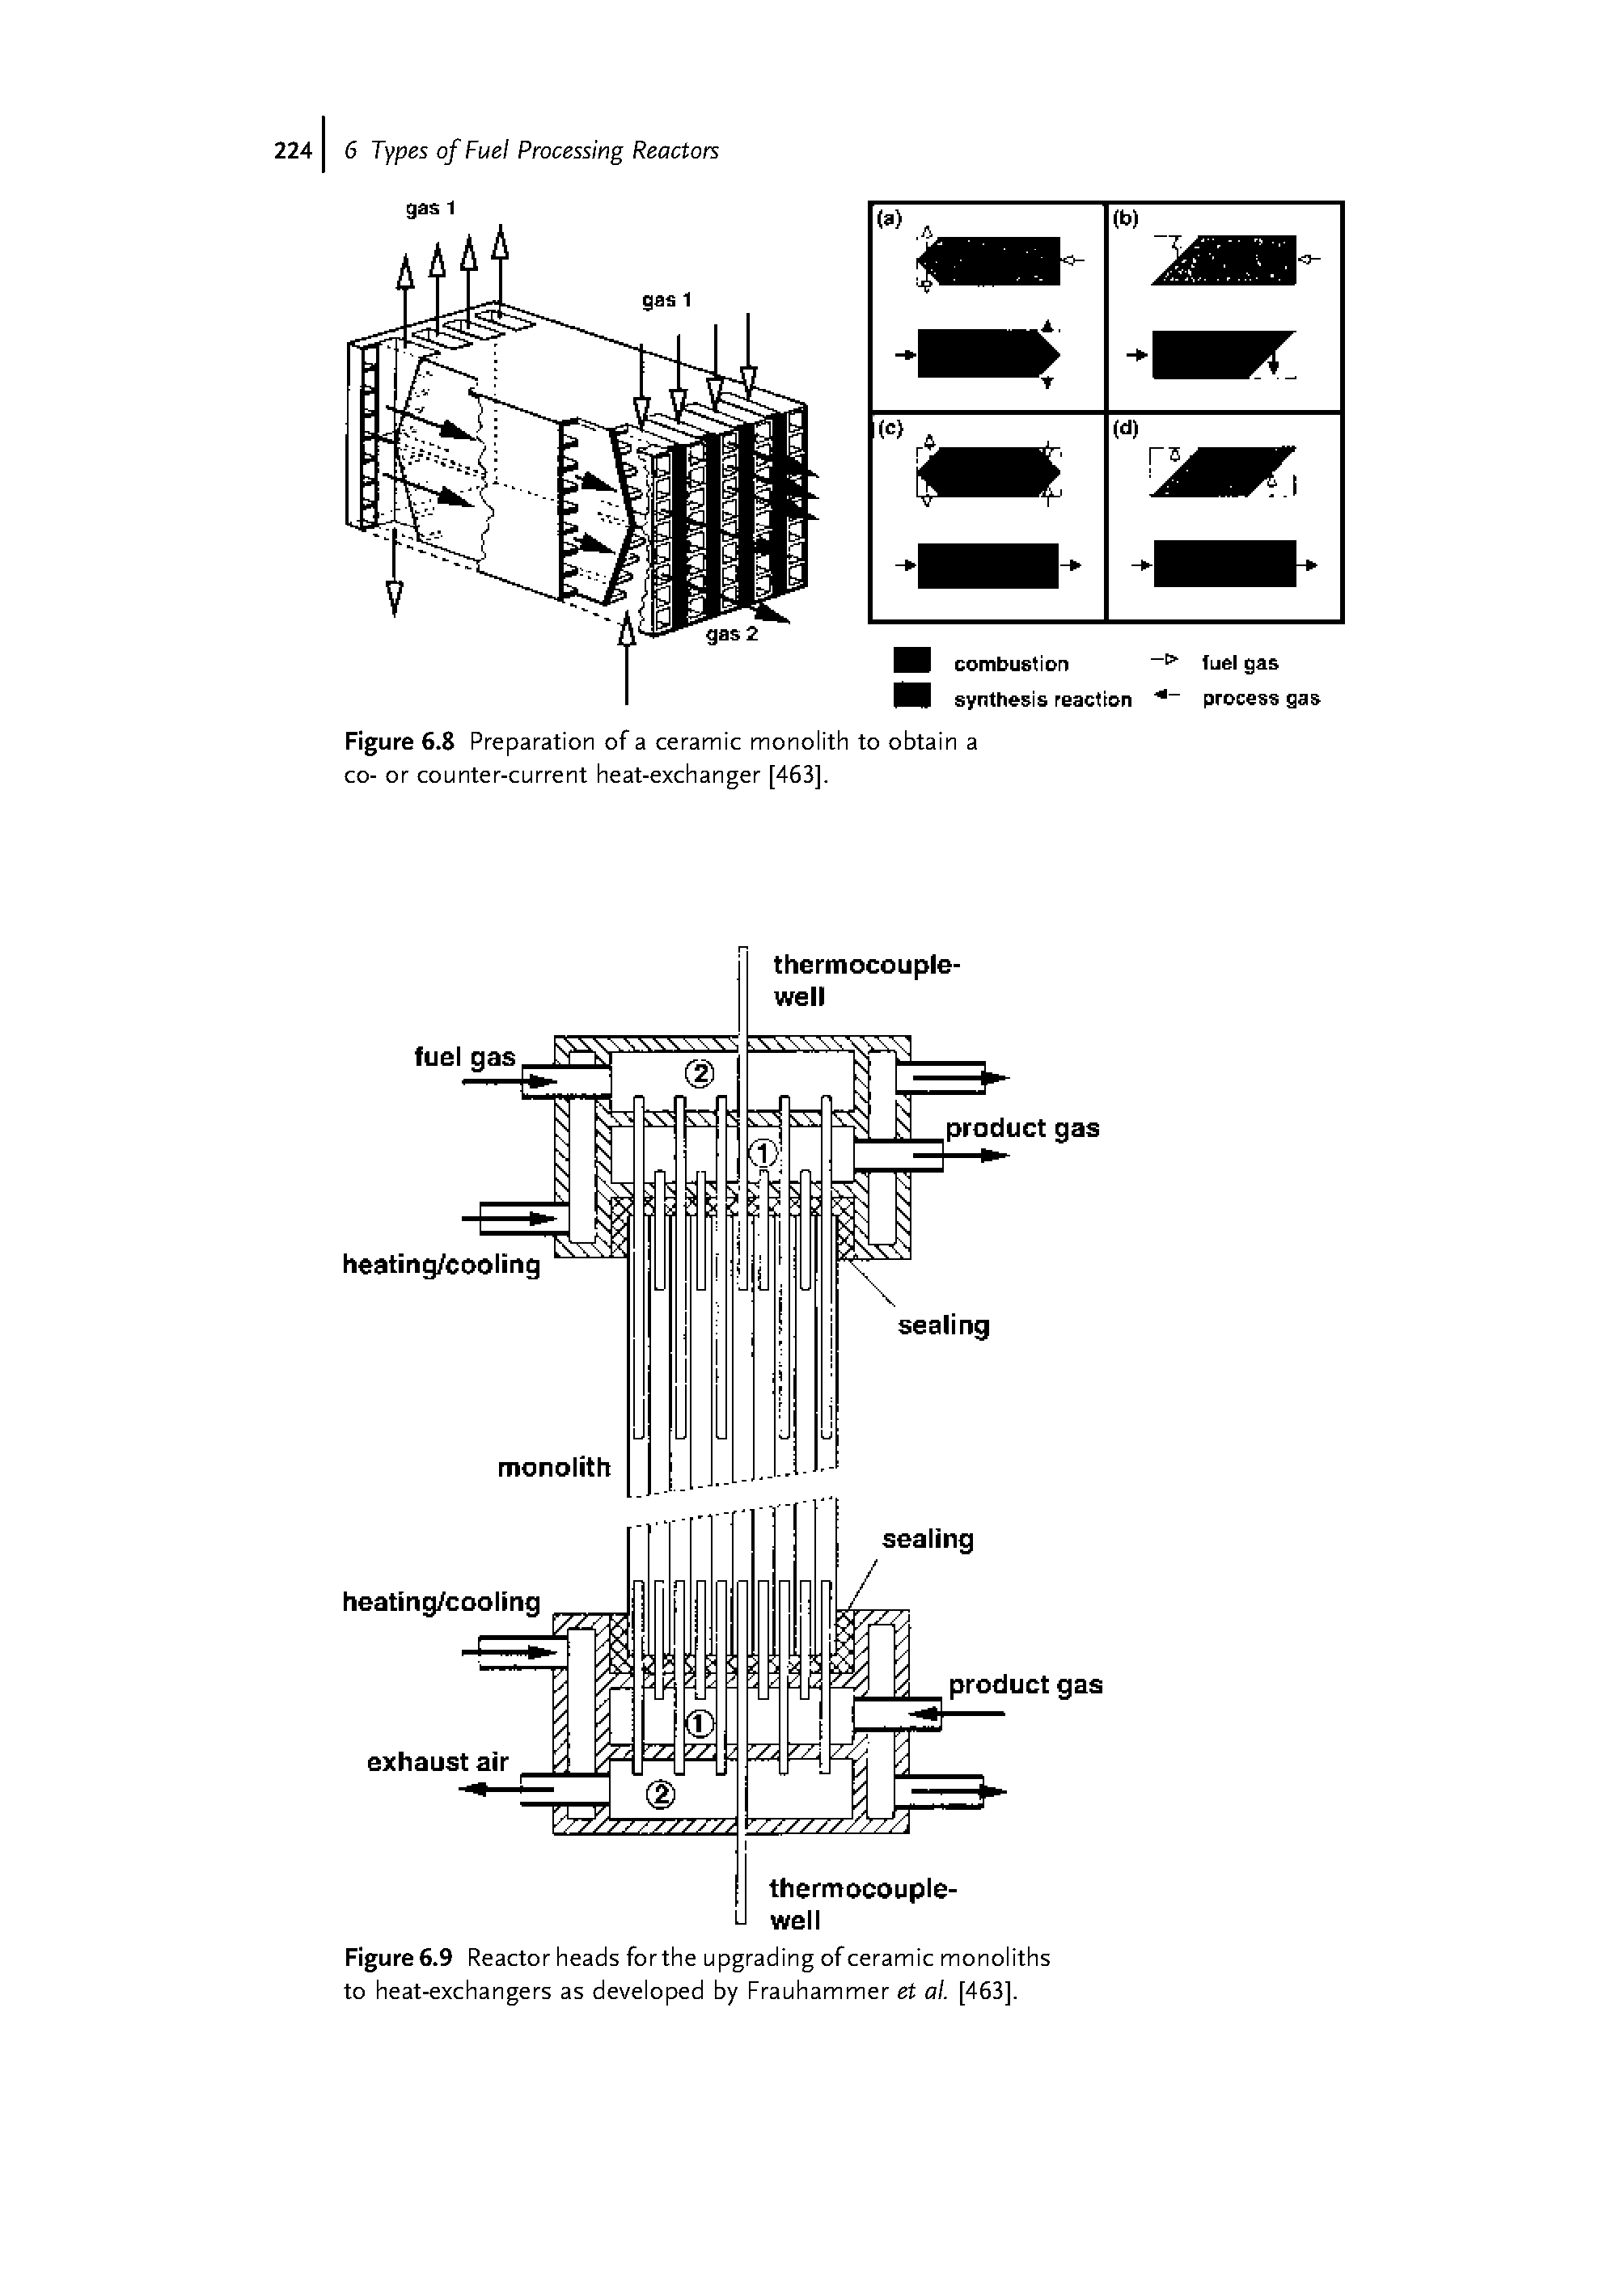 Figure 6.9 Reactor heads forthe upgrading of ceramic monoliths to heat-exchangers as developed by Frauhammer et al. [463].